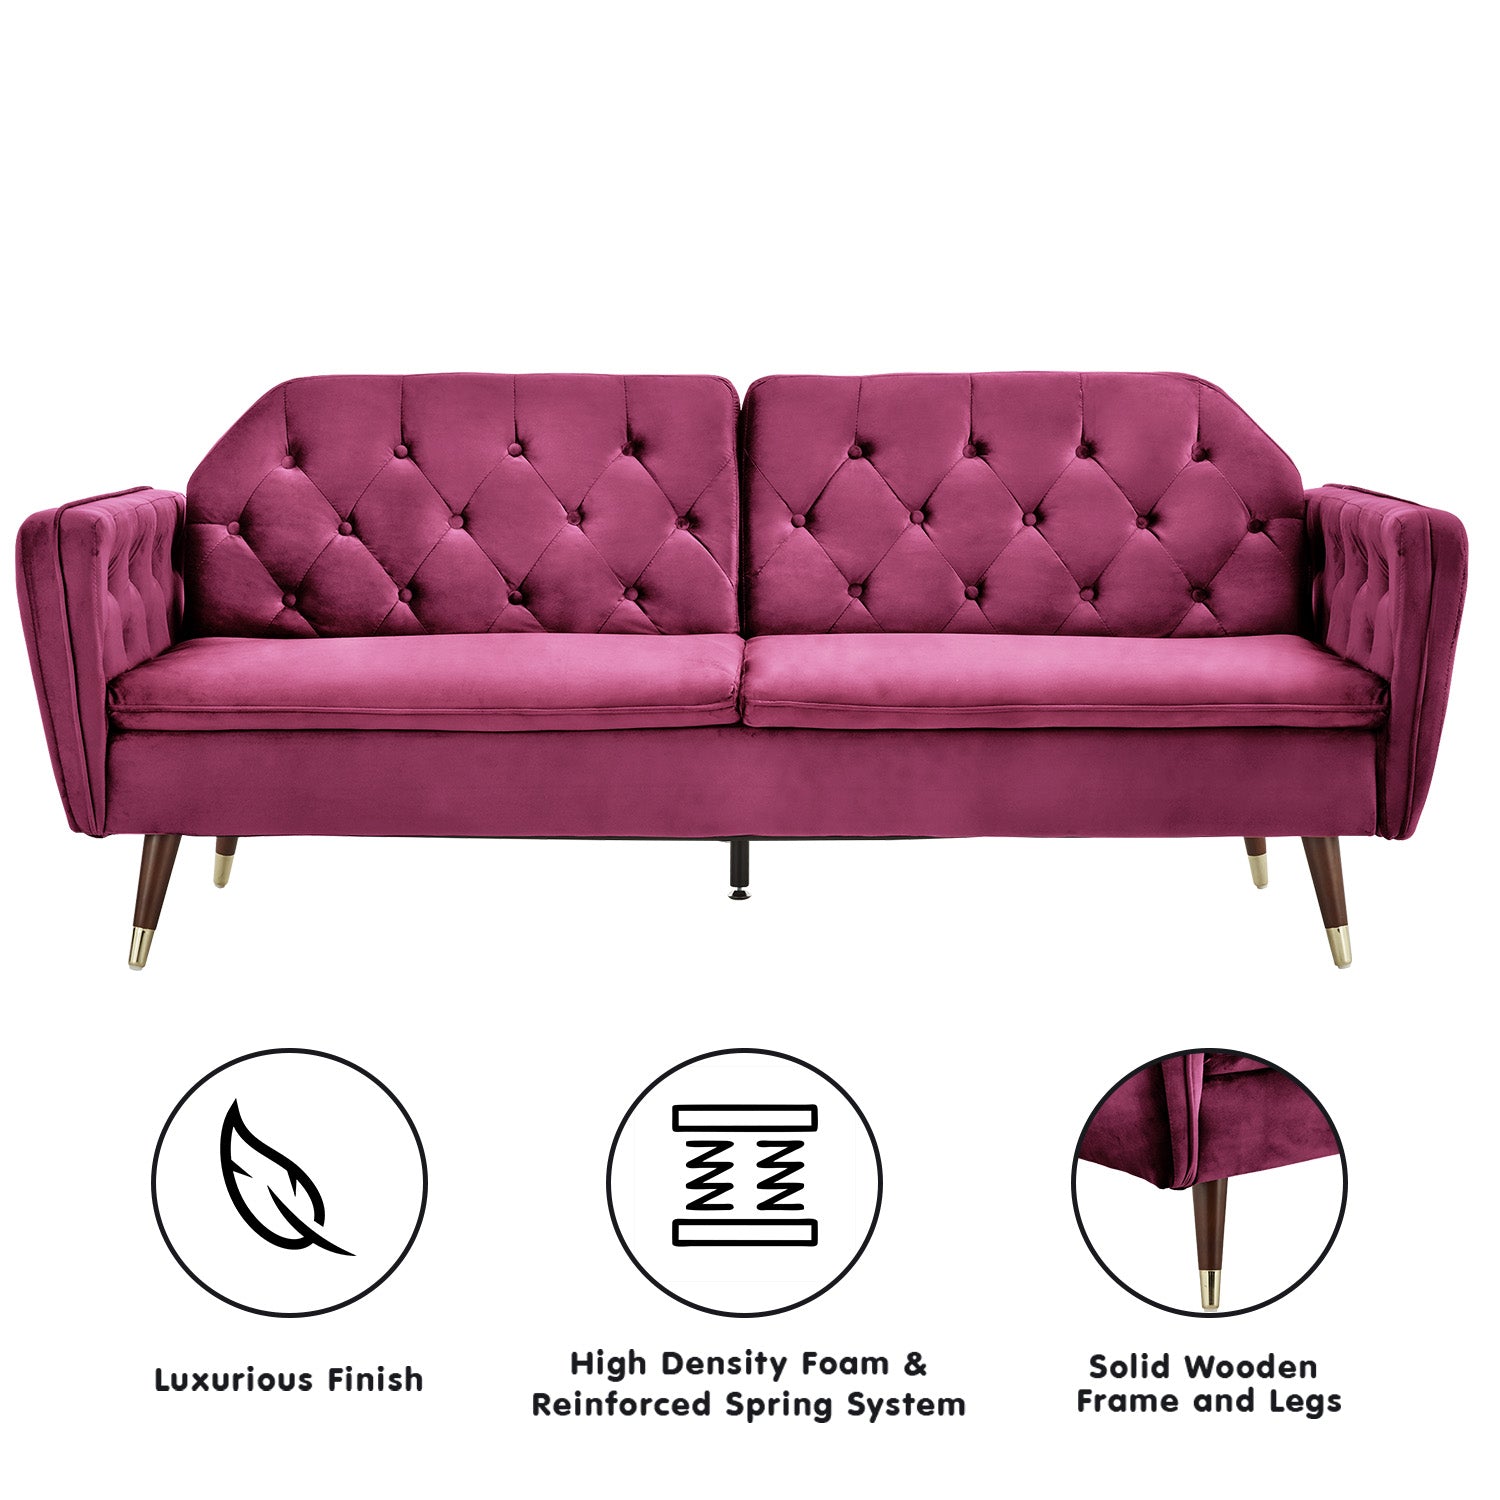 Faux Velvet Tufted Sofa Bed Couch Futon - Burgundy